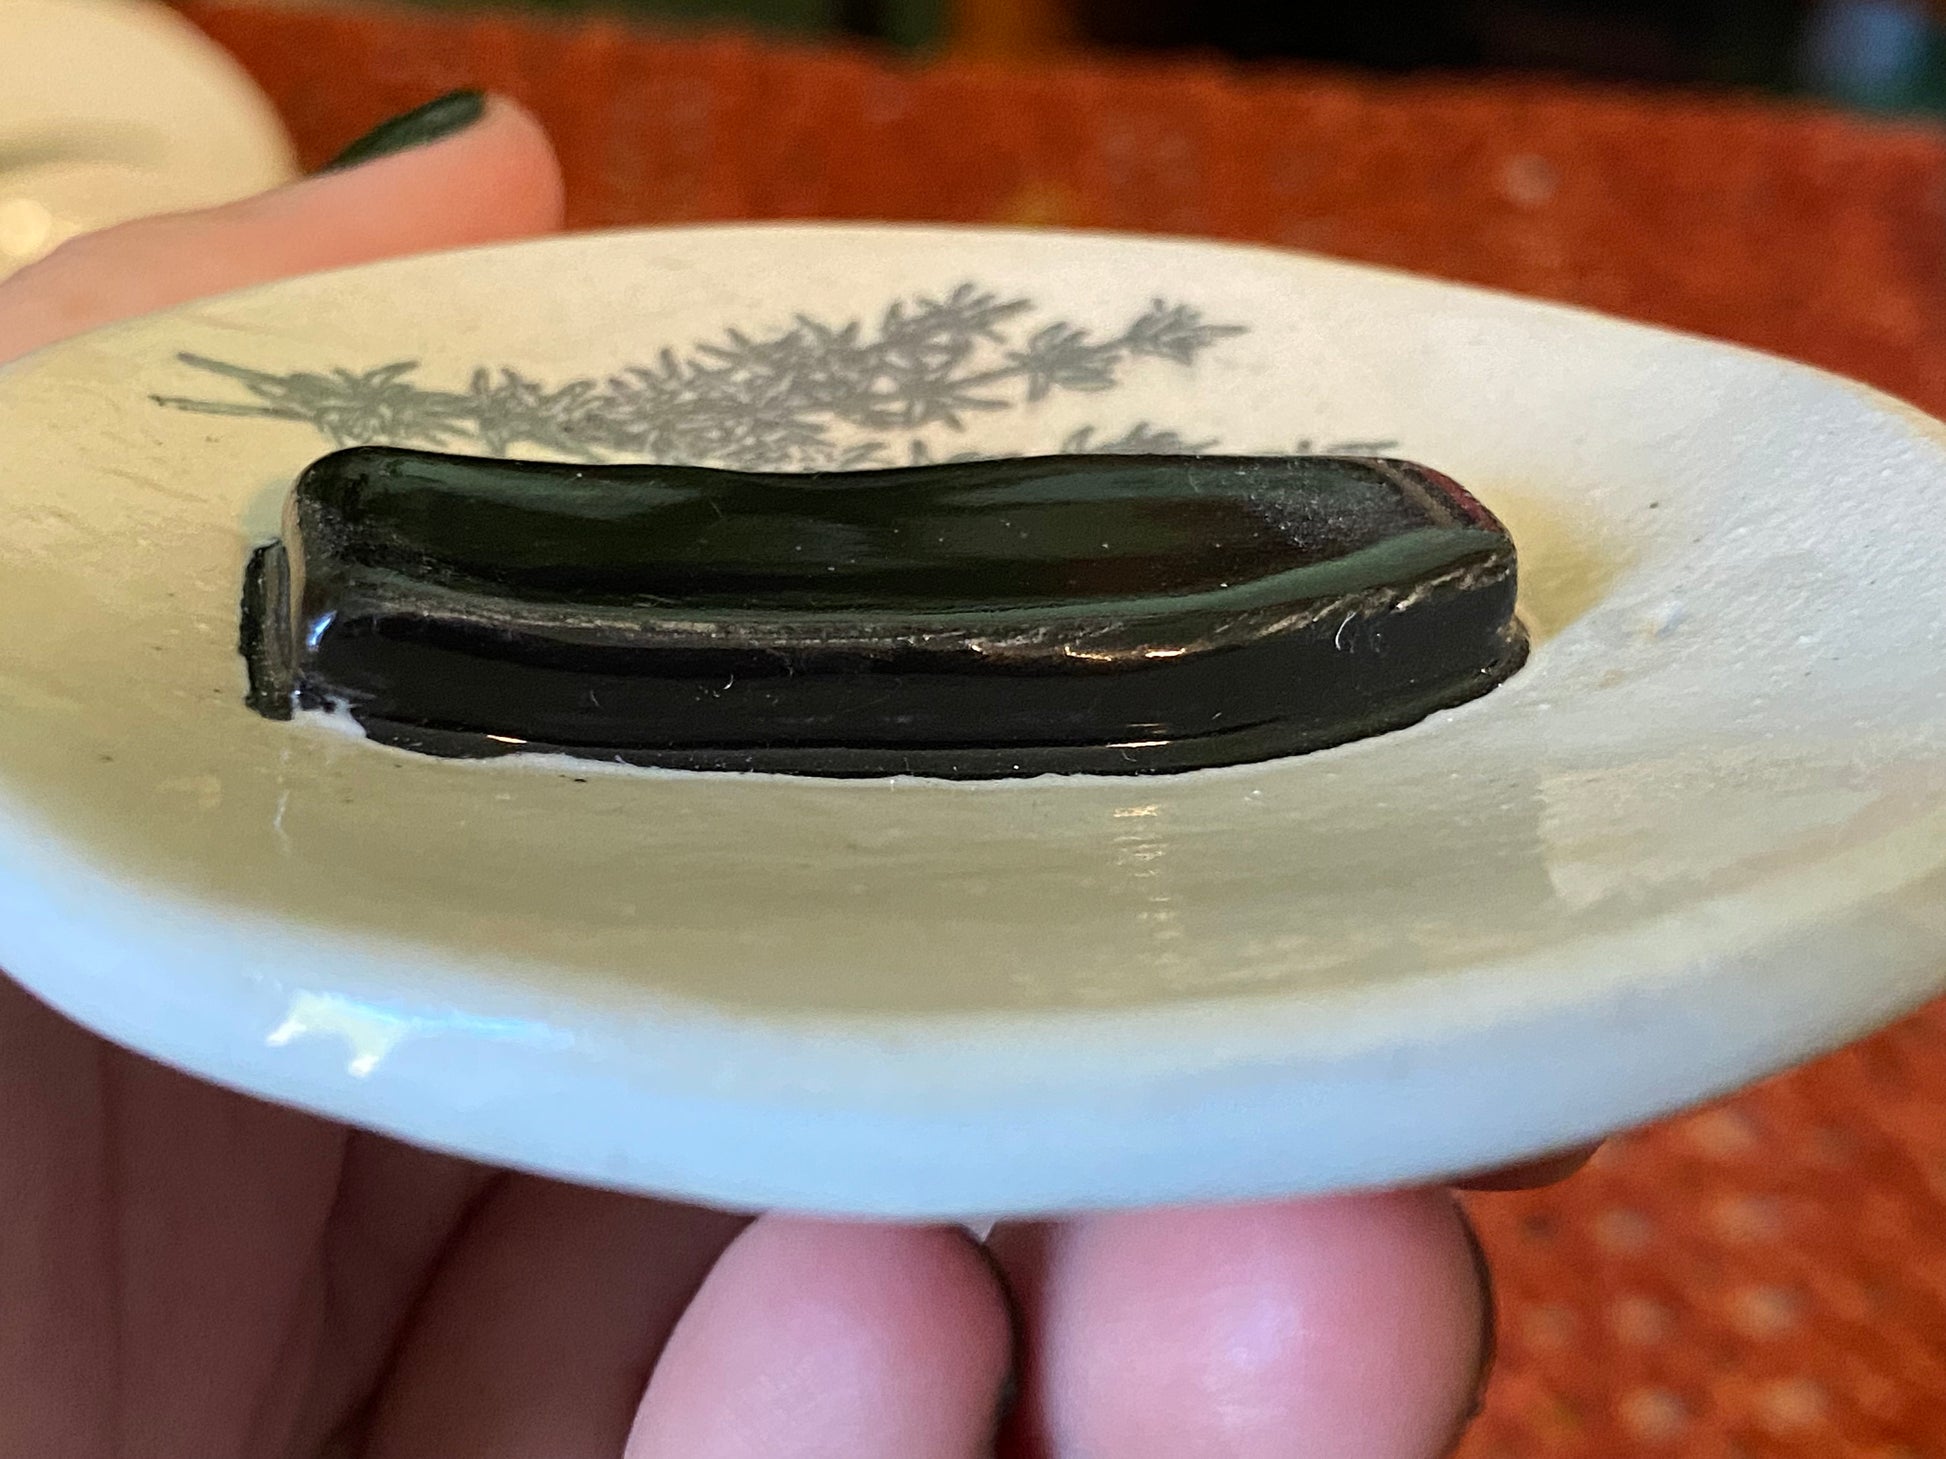 Handmade ceramic coffin trinket dish with rosemary herb design. Gothic ring dish. Witchcore home decor. Ancestor altar offering dish